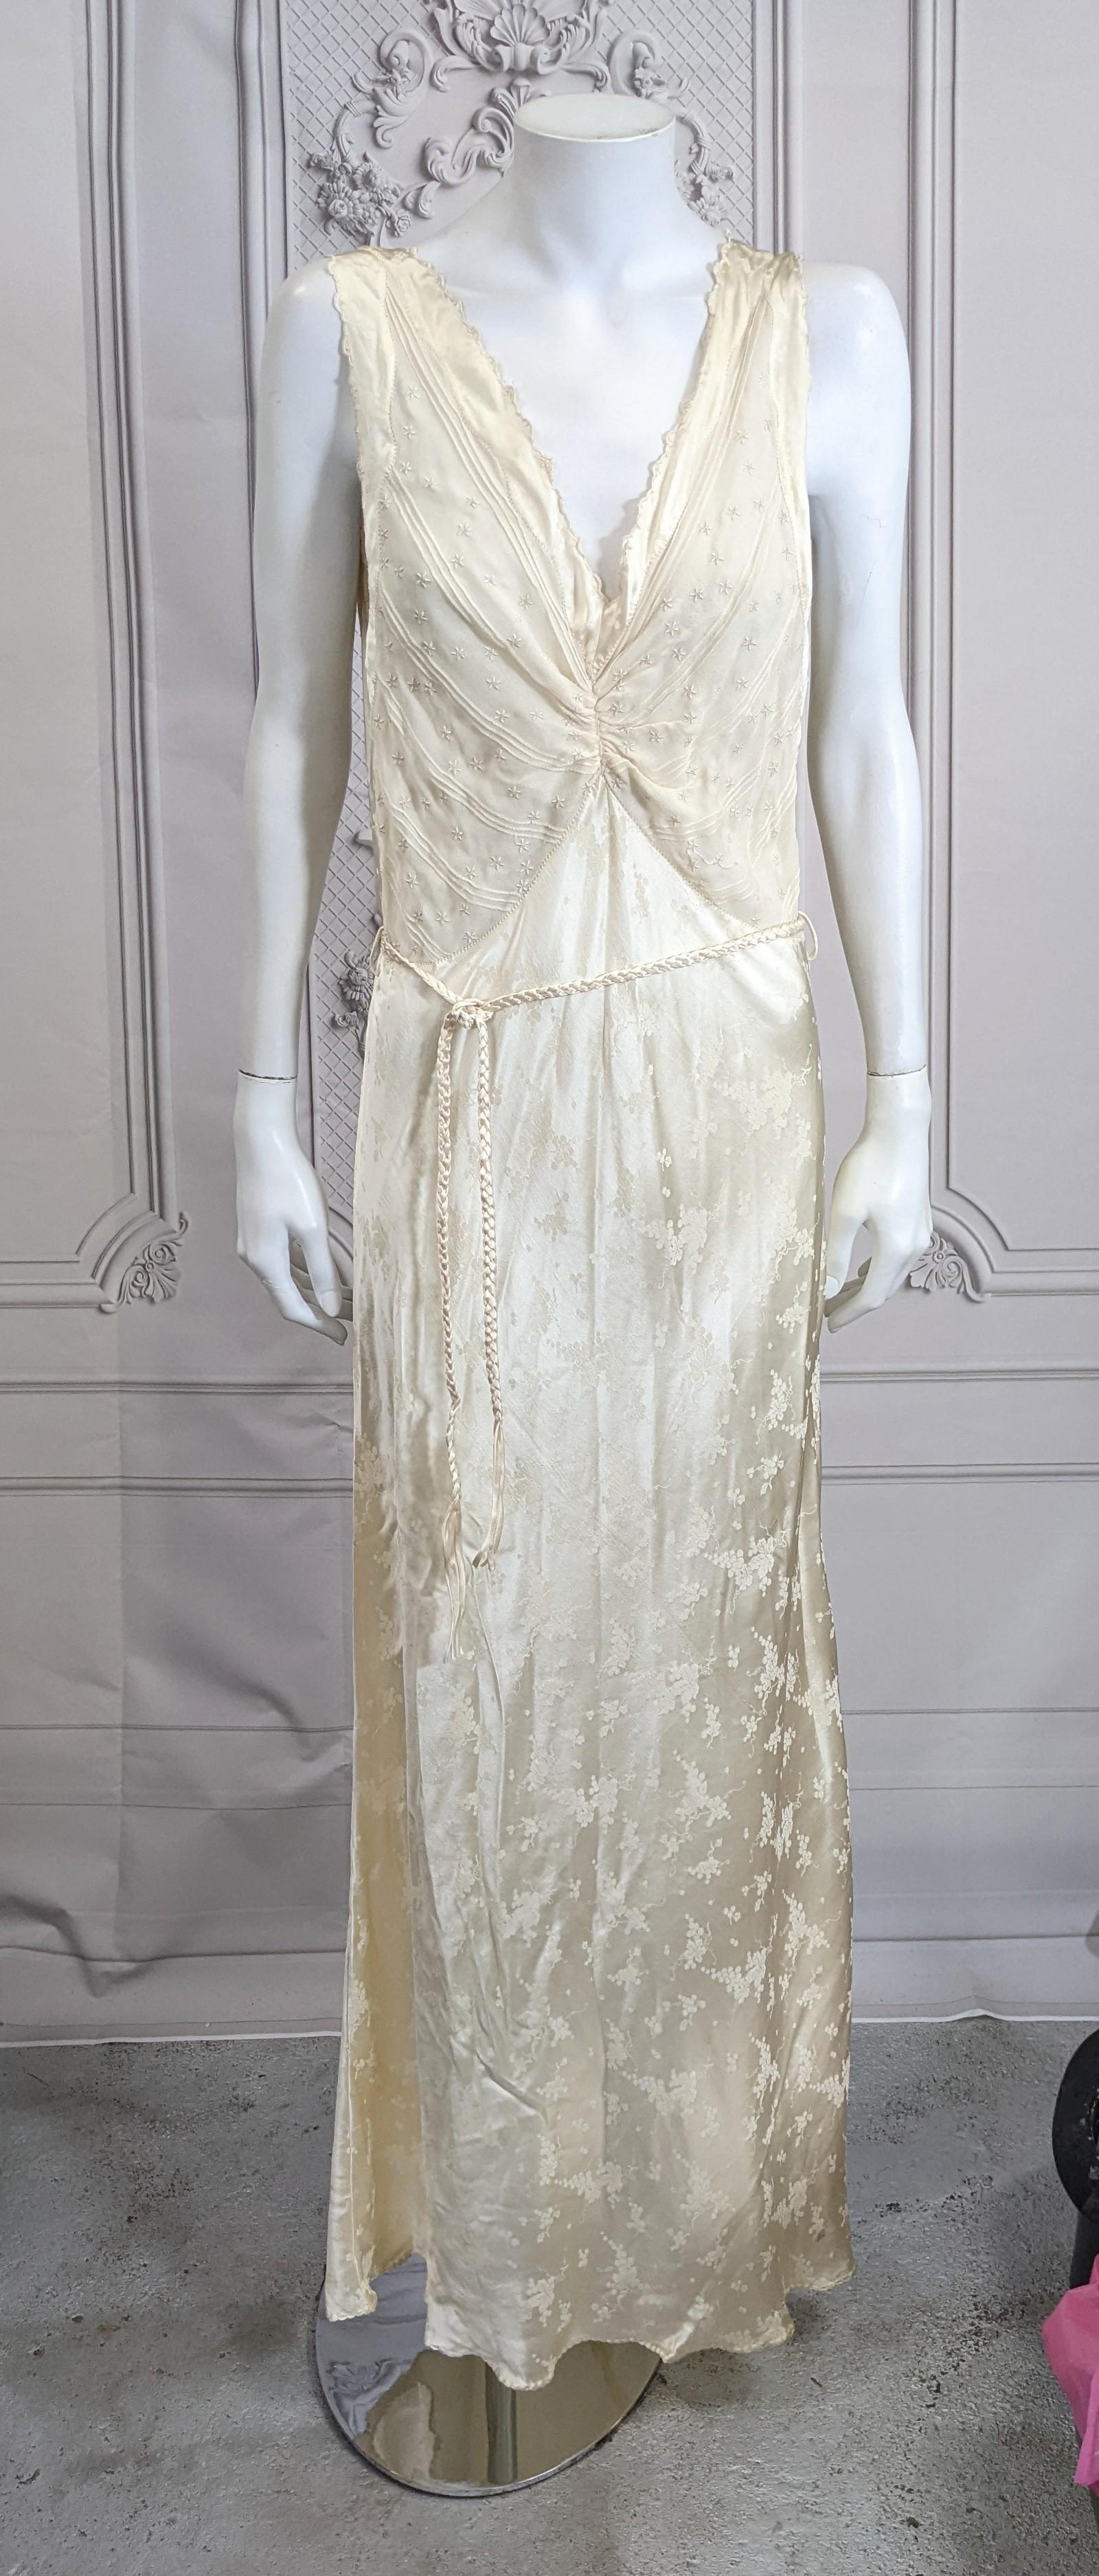 Elegant Chiffon and Satin Art Deco Slip from the 1930's. Bias cut doubled chiffon is used in the bodice (sheer) embroidered with hundreds of flower heads and pintucks. The skirt is bias cut silk satin crepe with grape motifs. Deep armholes and